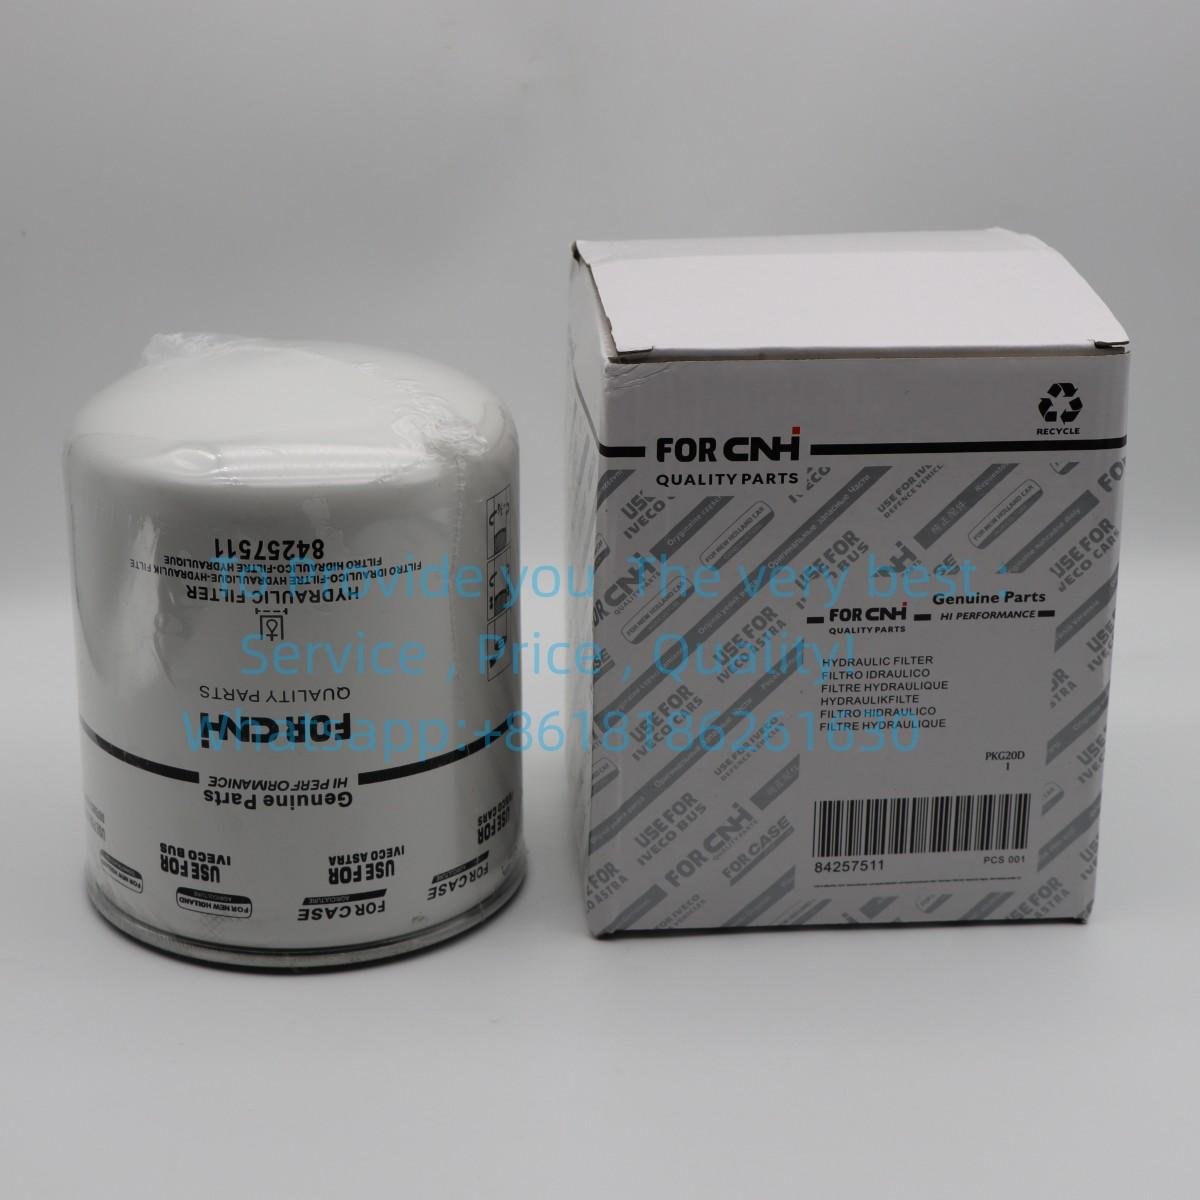 FILONG FILTER Hydraulic oil filter uses for case tractor Case 84257511; Donaldson P765662; Mann & Hummel W14005,  5174044 47131196 8012300 HF29117 84257511 , 82824884 P765662 BT23555-MPG 47131195 84168722 84257511 SH86002